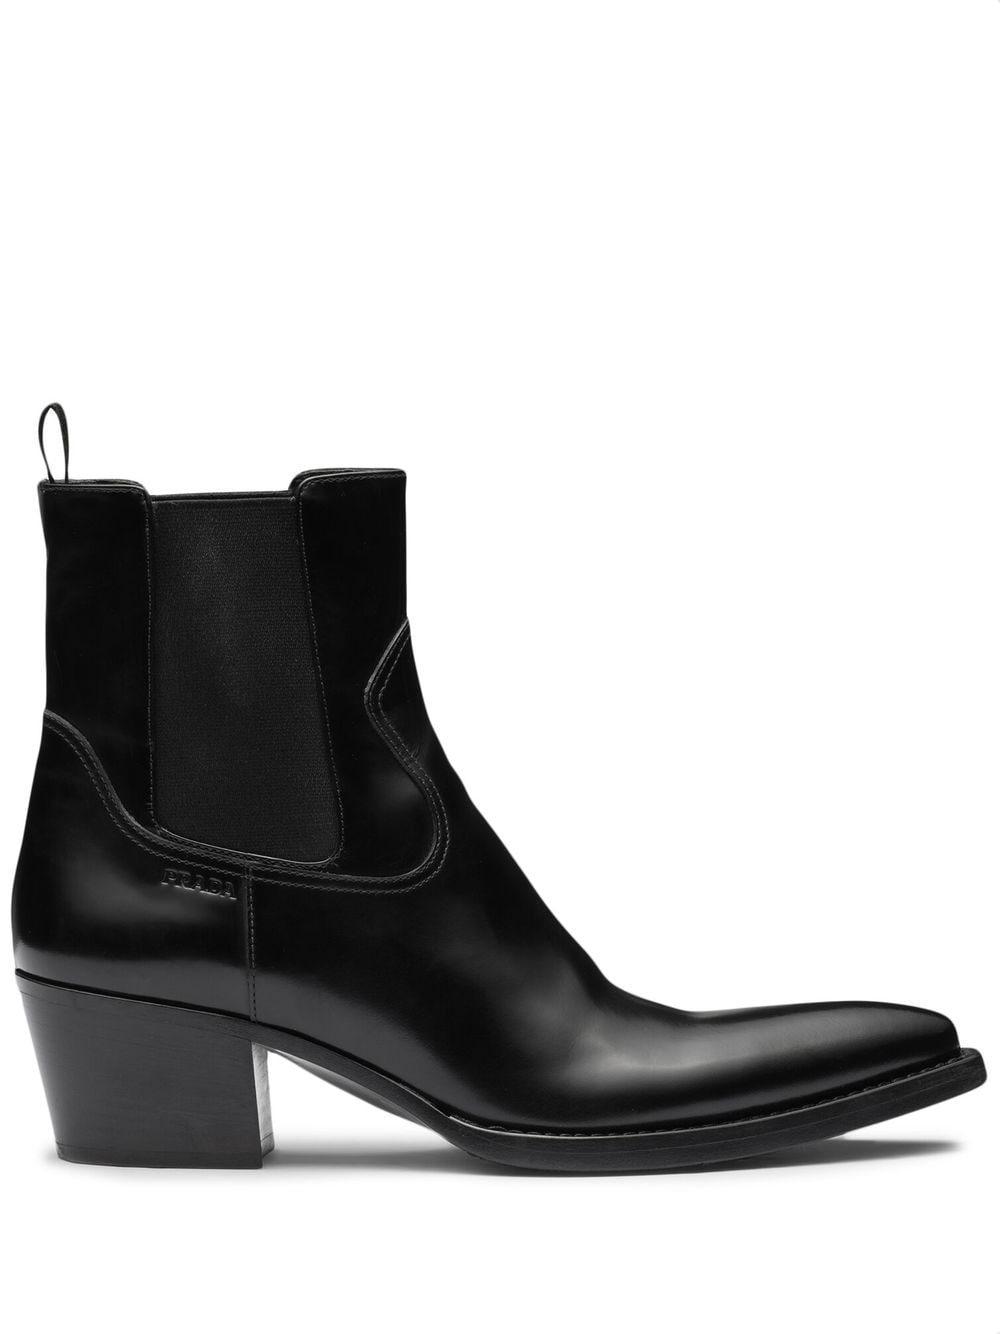 Prada Brushed Leather Chelsea Boots in Black | Lyst